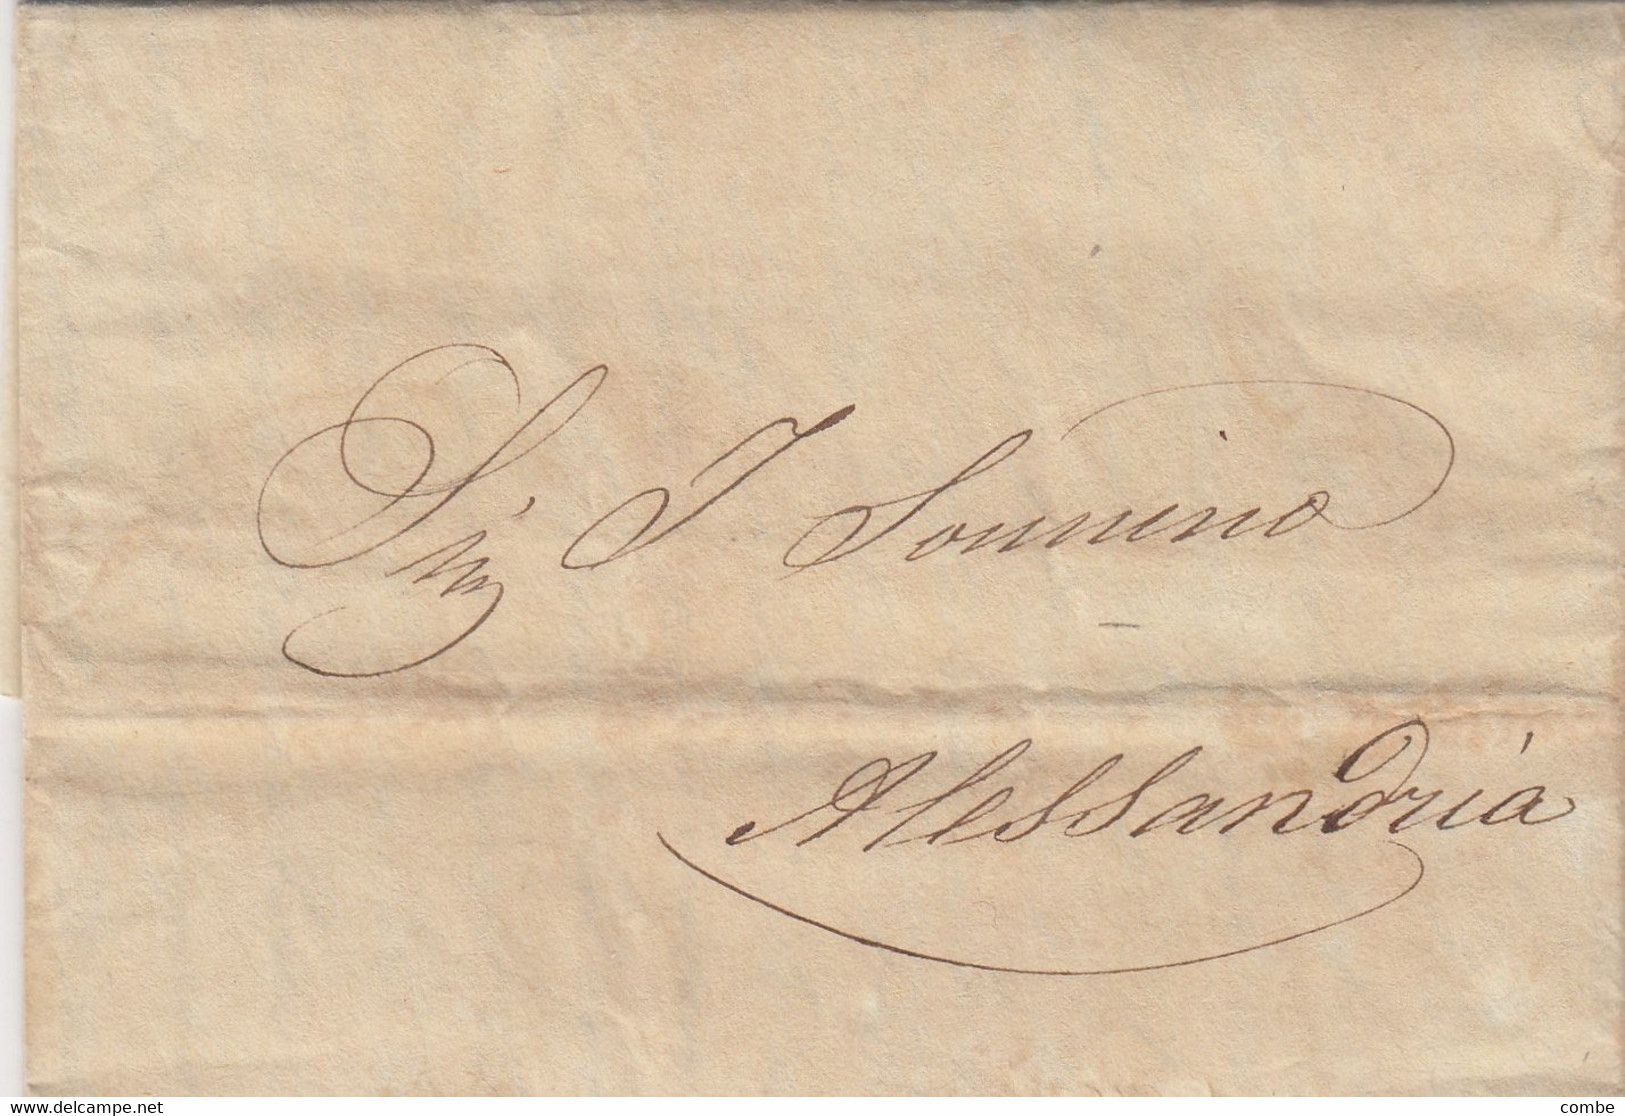 OLD LETTER. EGYPT. 6 2 1837. CAIRO TO J. SONNINO, ALESSANDRIA. TEXT IN ITALIAN - Voorfilatelie